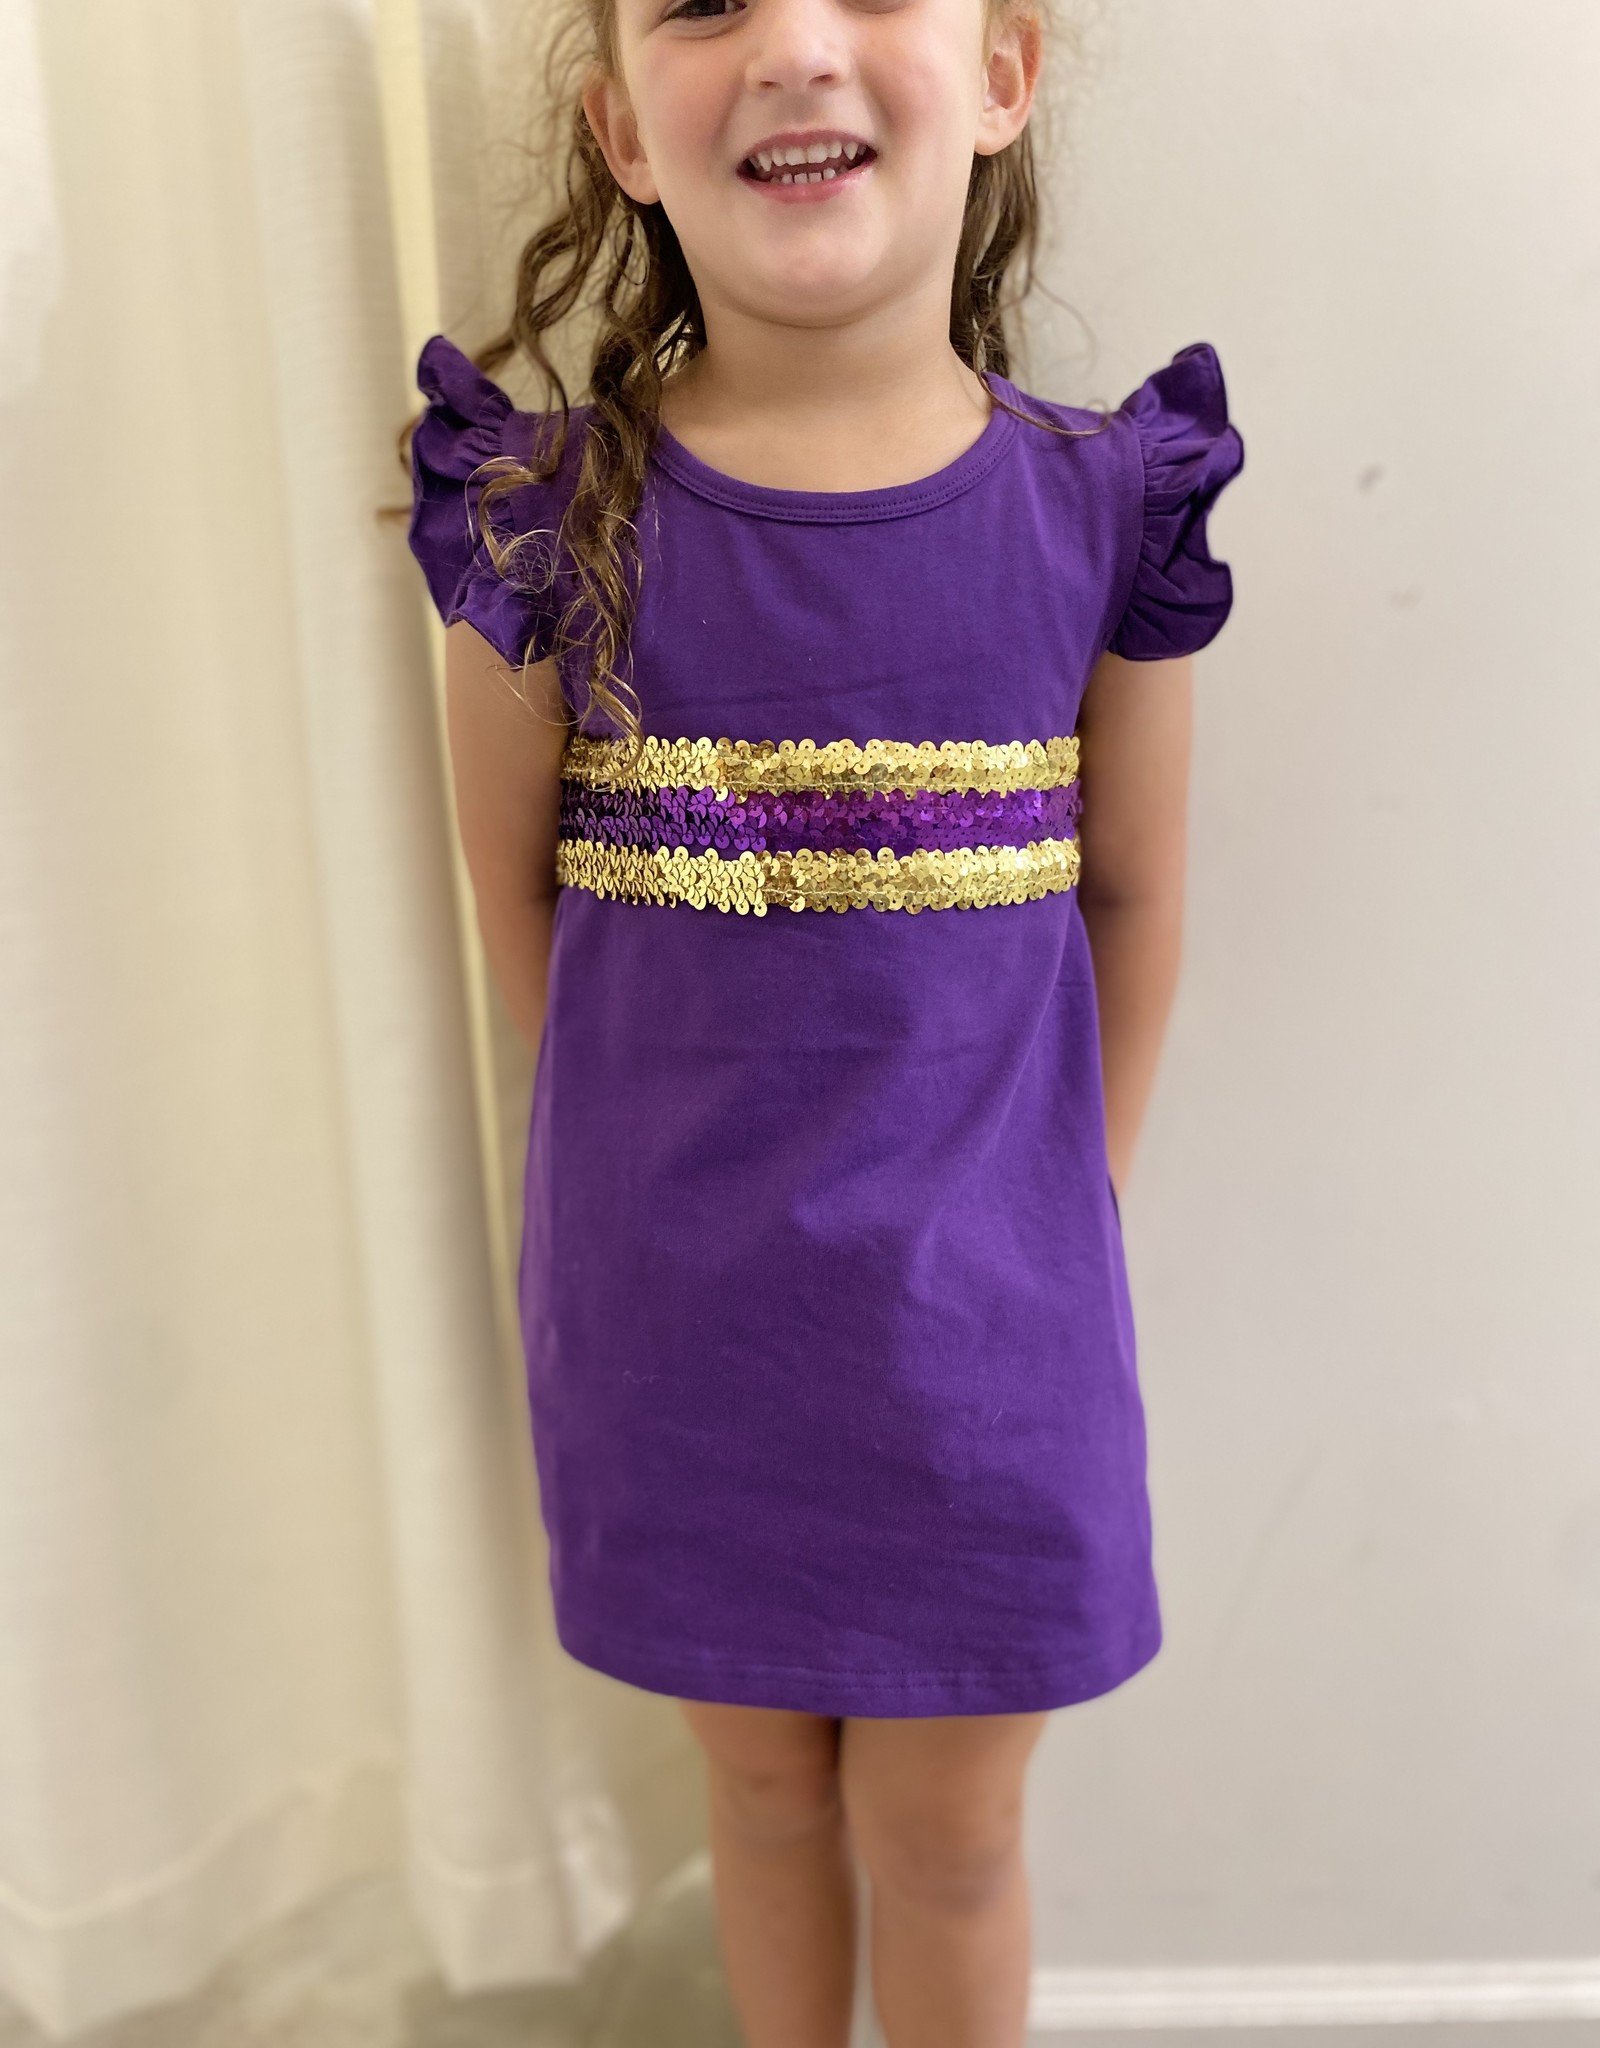 Purple and Gold Sequin Gameday Dress